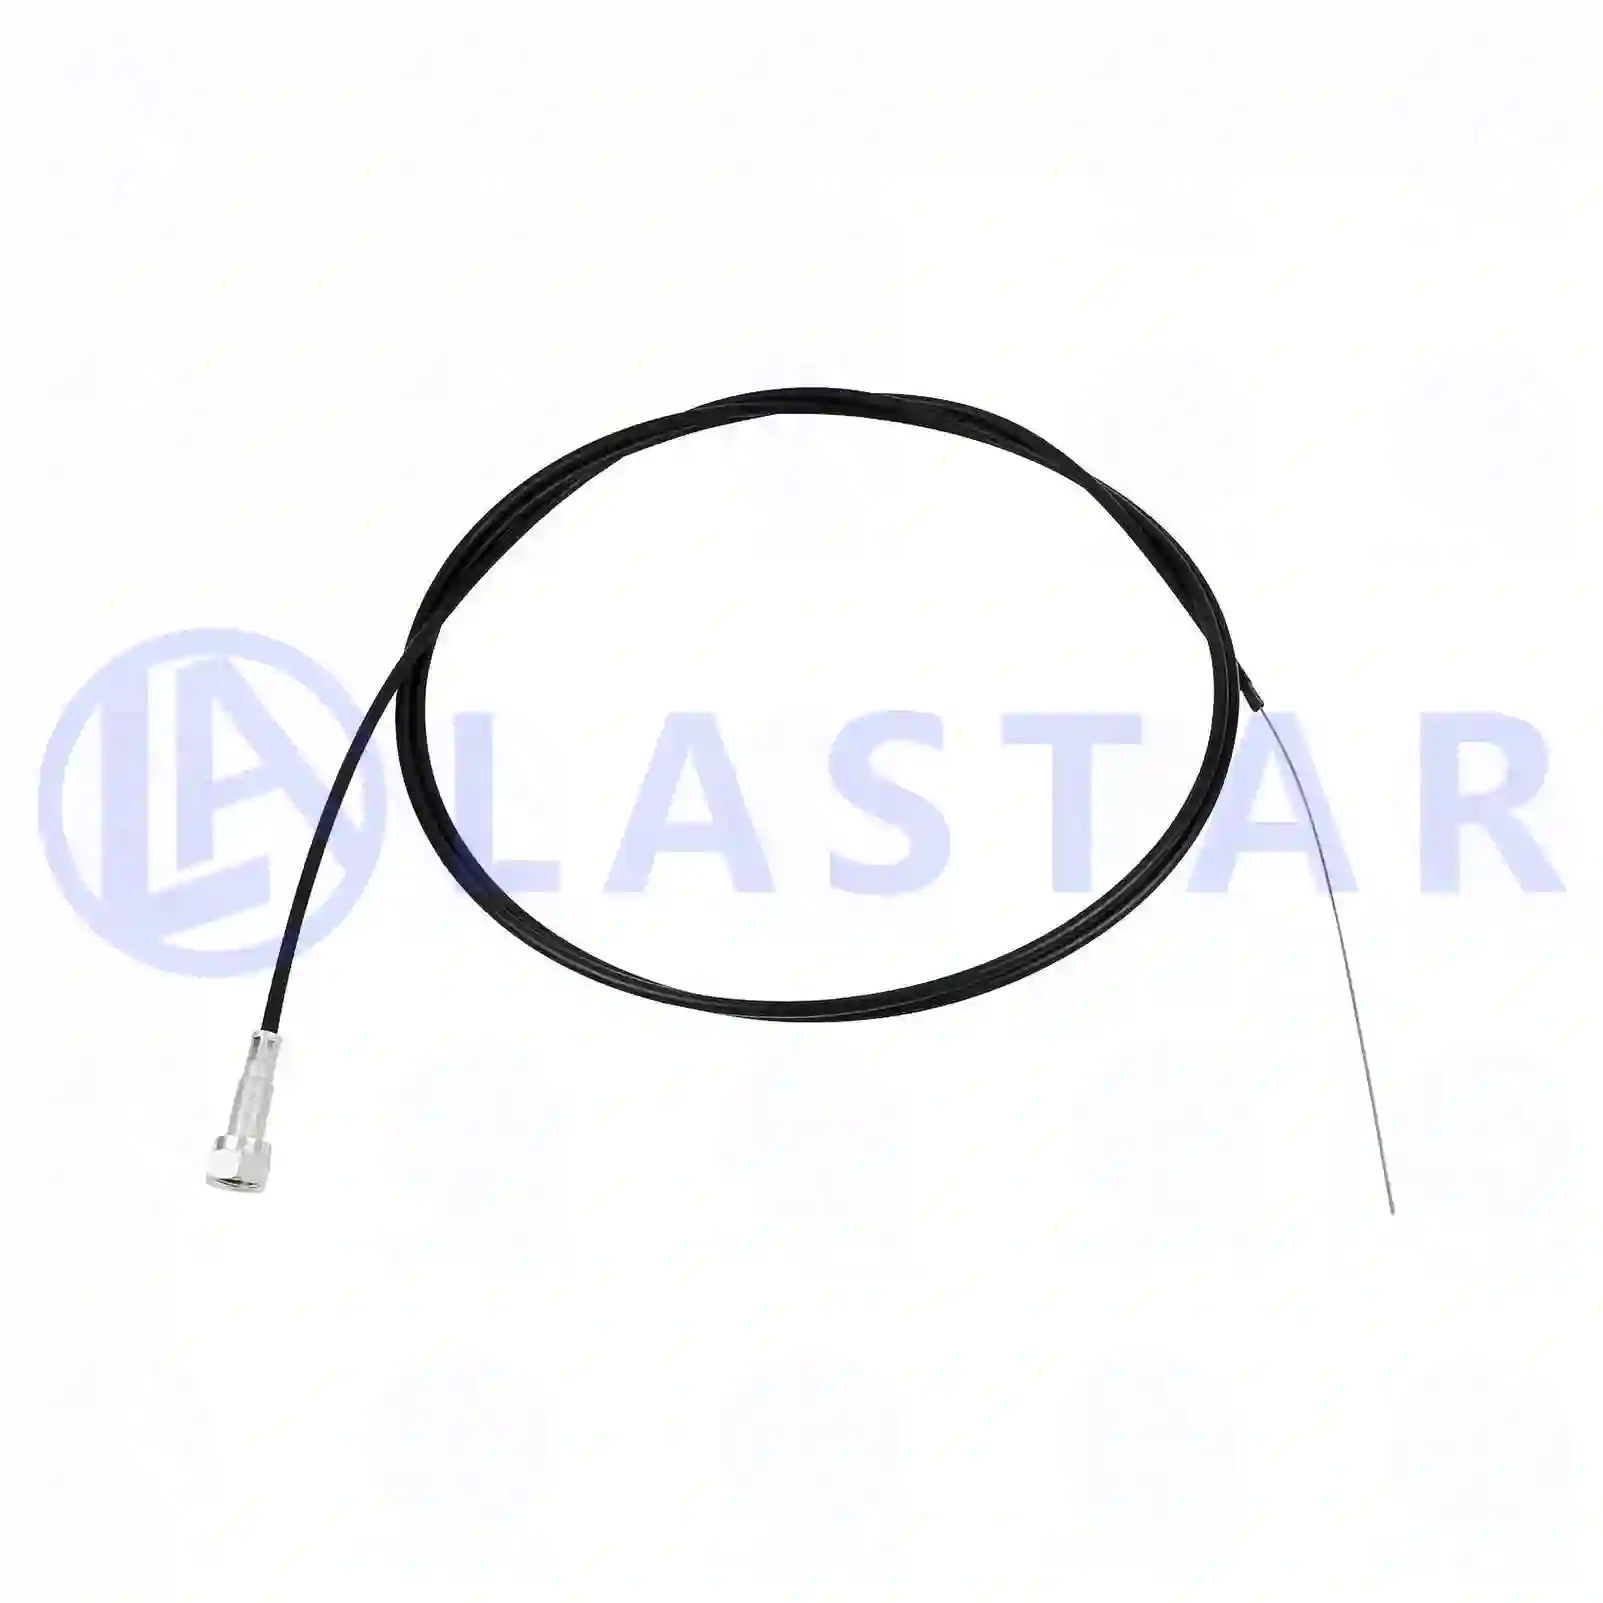 Throttle cable, 77700798, 312354, 365162, 1614180, ZG02199-0008 ||  77700798 Lastar Spare Part | Truck Spare Parts, Auotomotive Spare Parts Throttle cable, 77700798, 312354, 365162, 1614180, ZG02199-0008 ||  77700798 Lastar Spare Part | Truck Spare Parts, Auotomotive Spare Parts